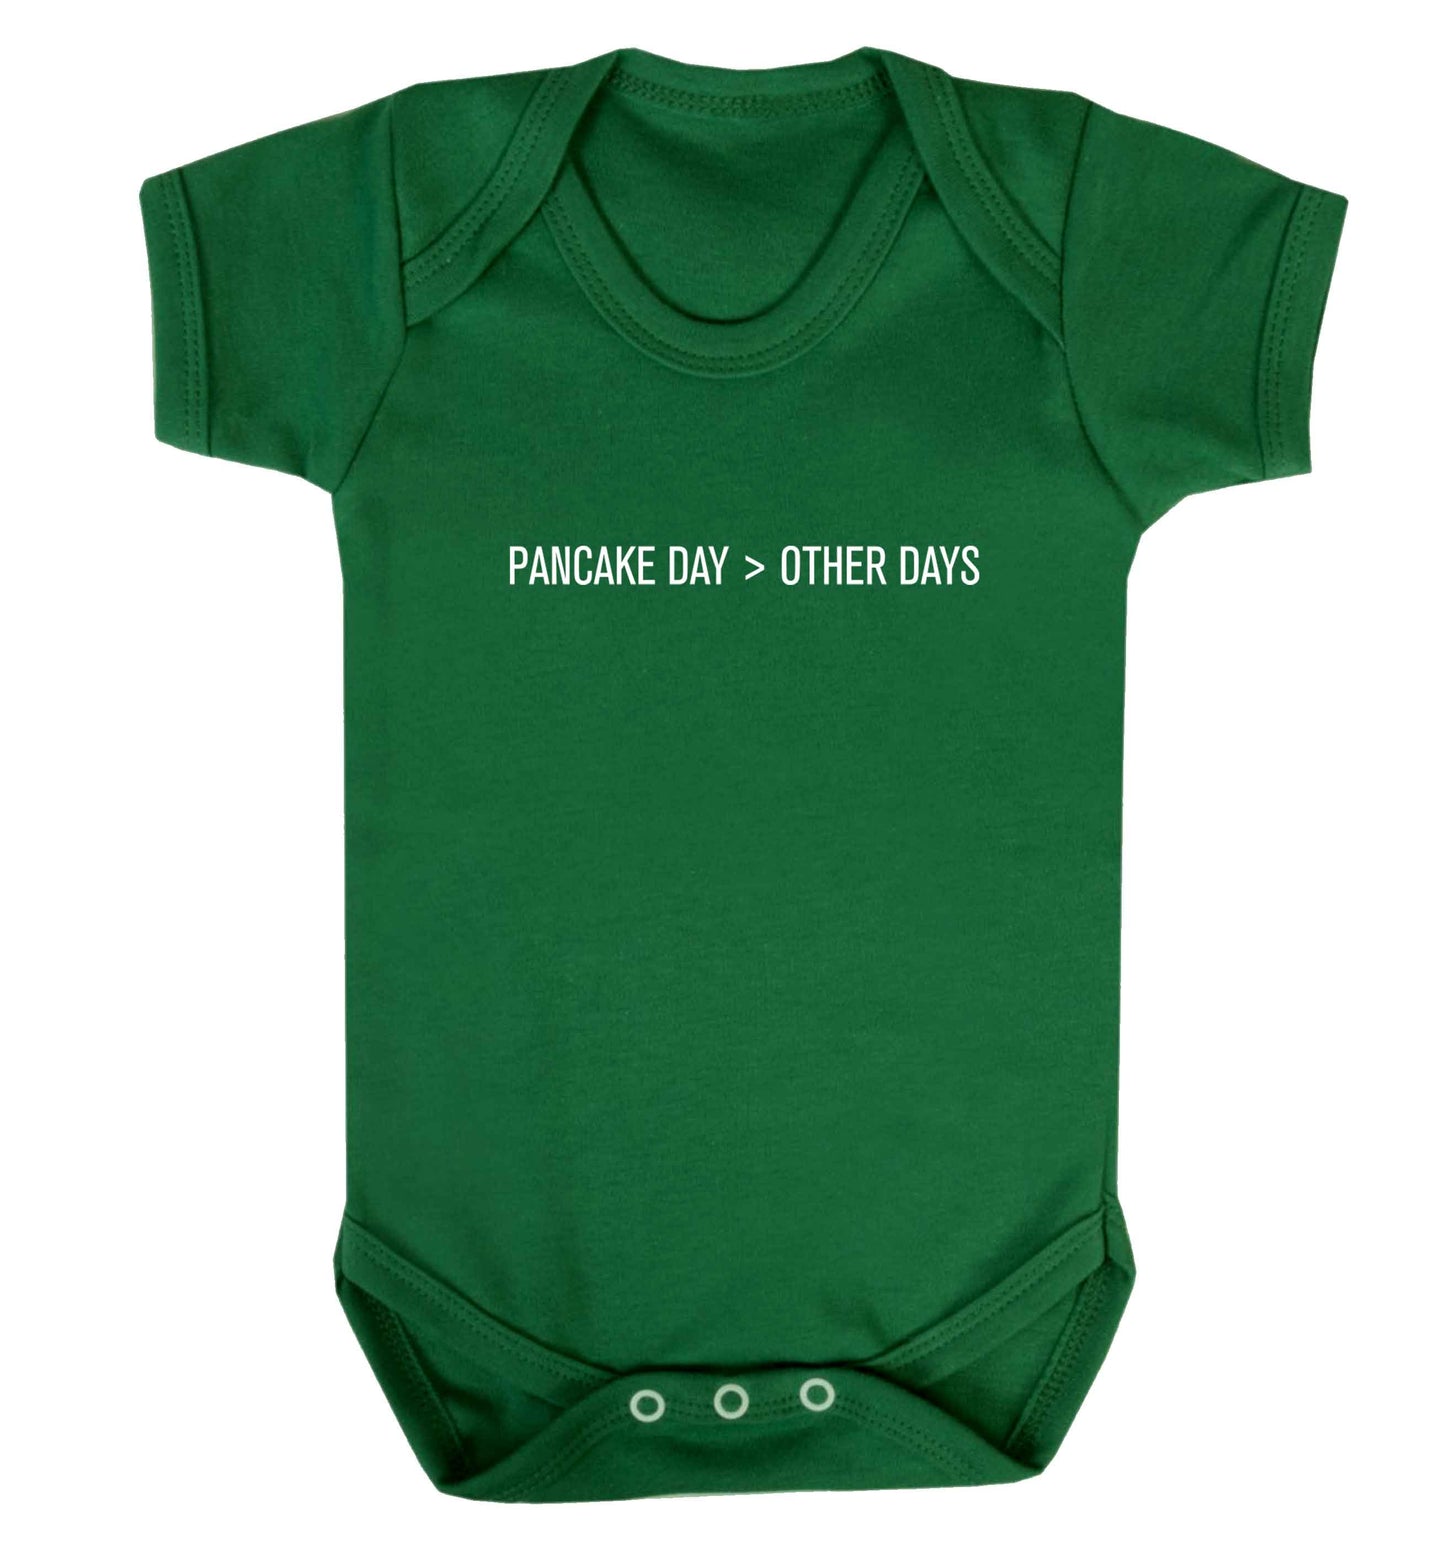 Pancake day > other days baby vest green 18-24 months